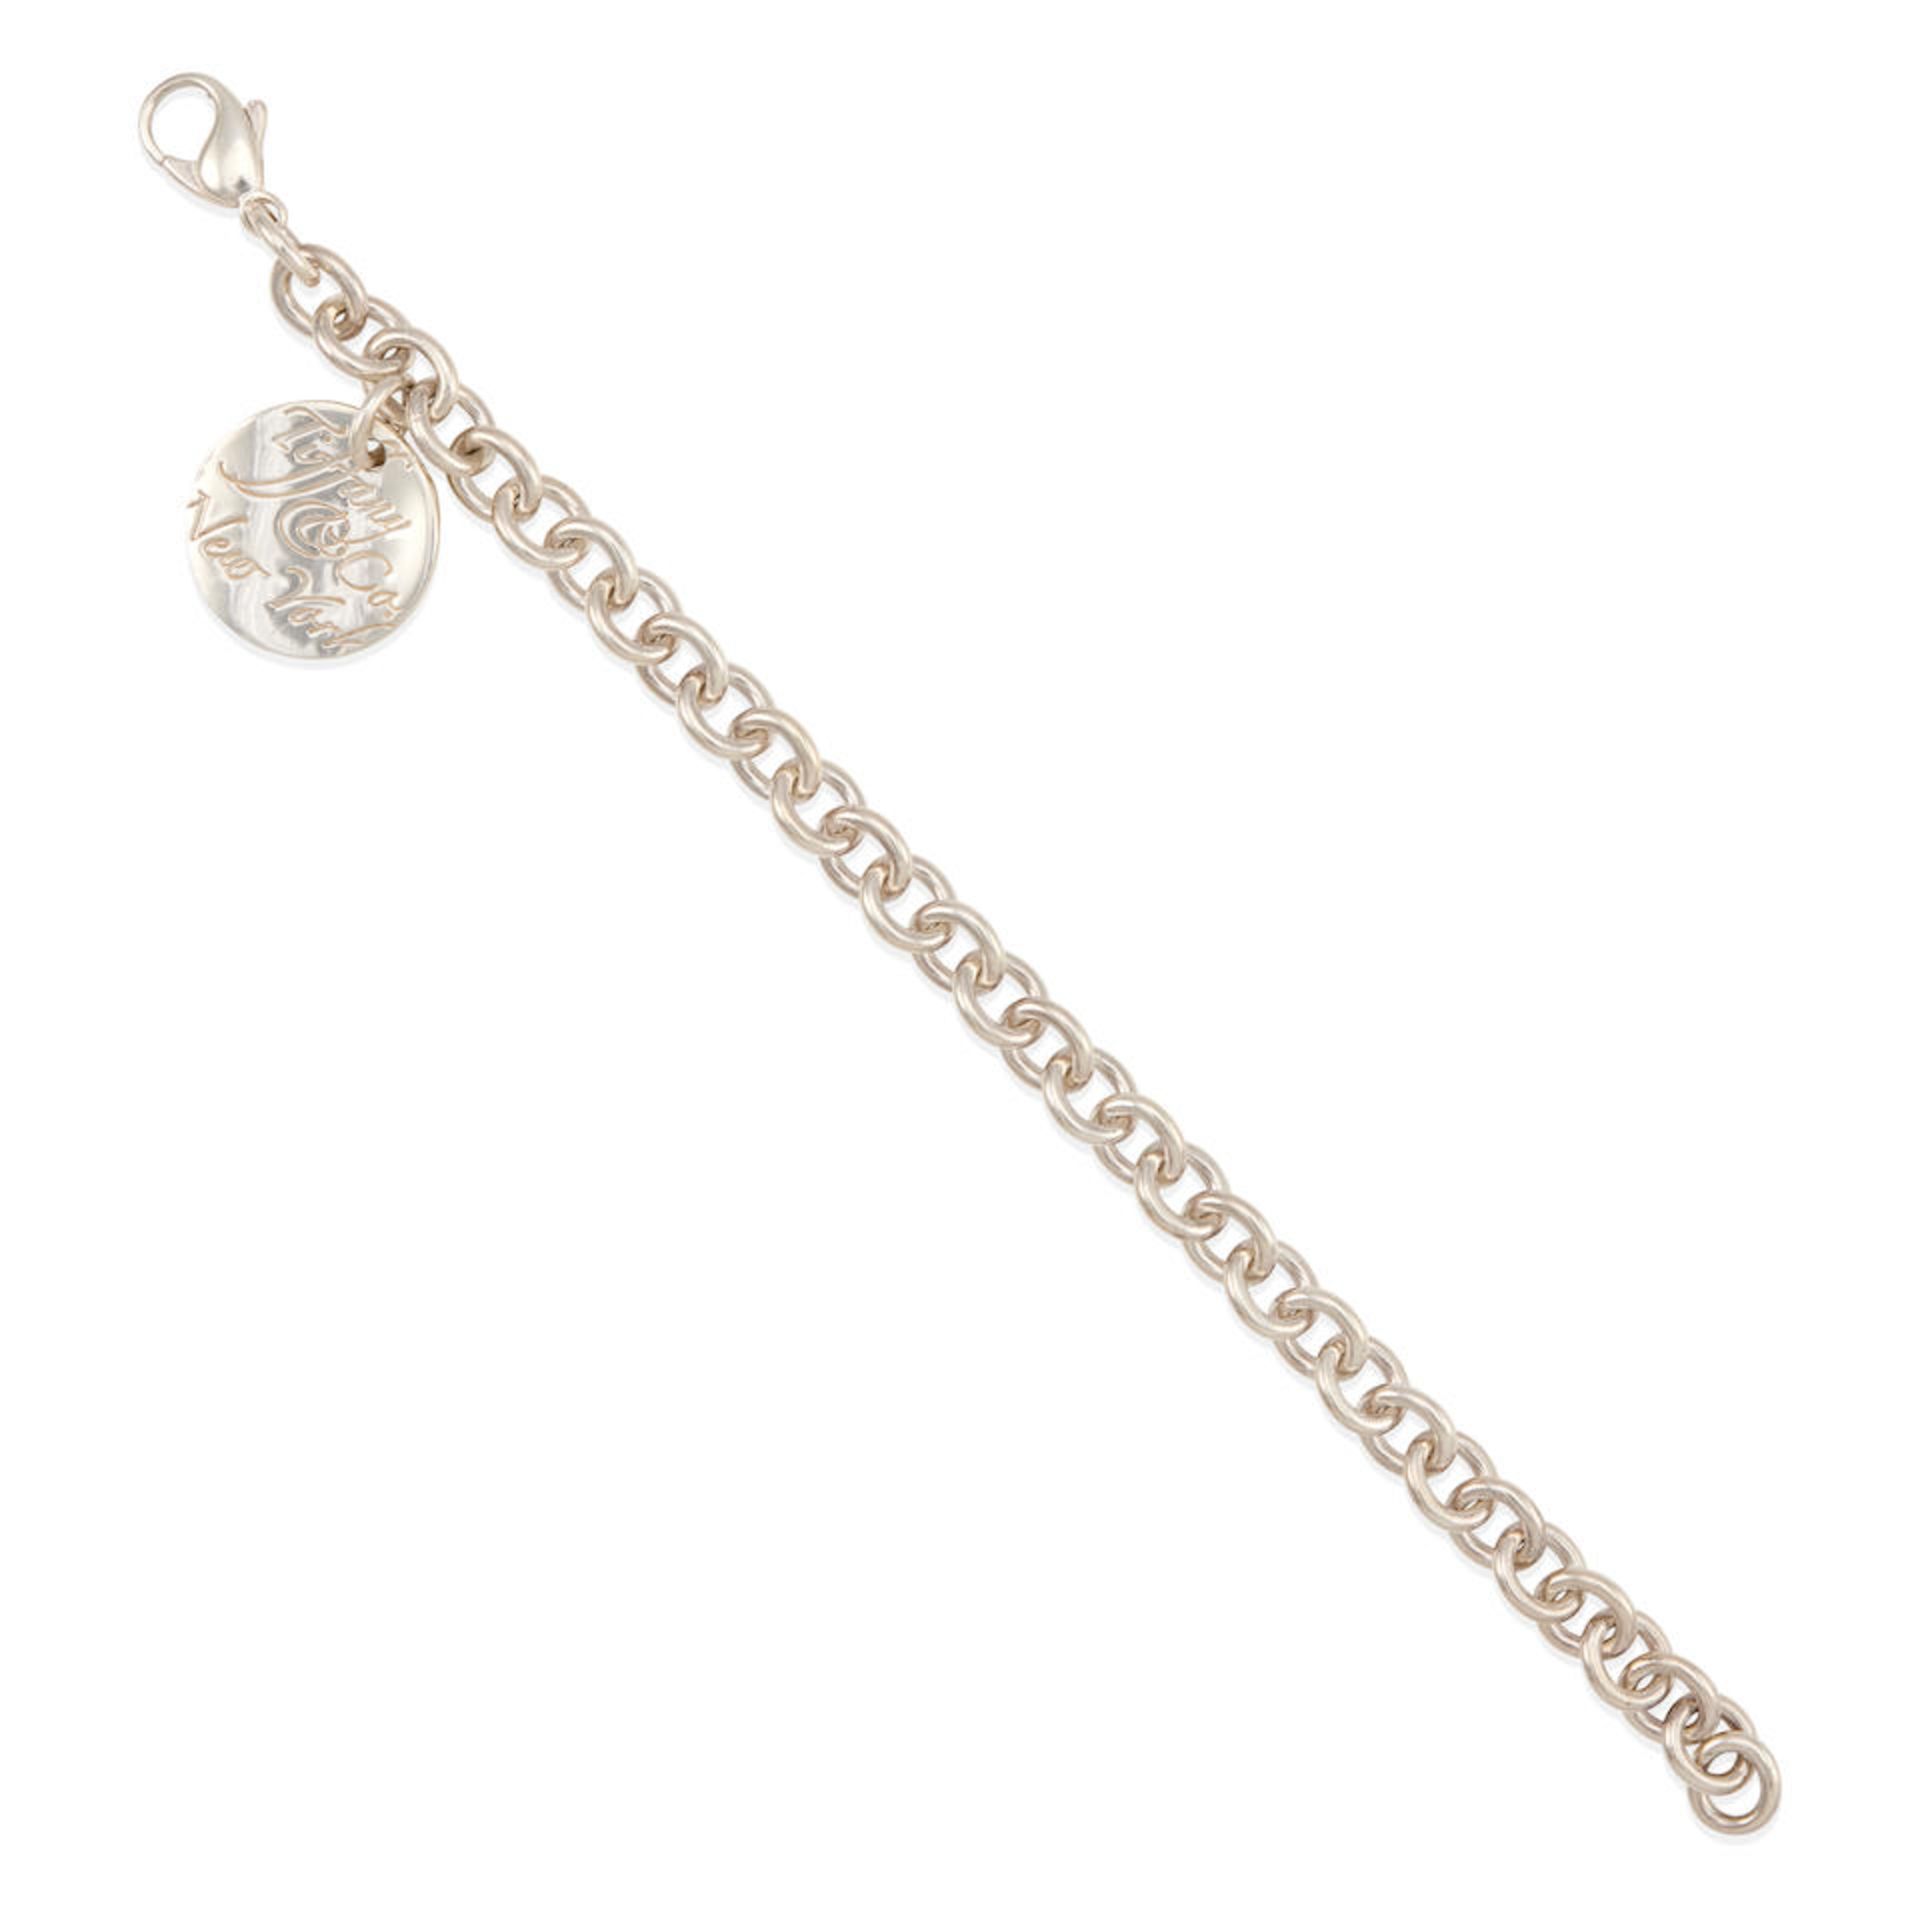 TIFFANY & CO.: A STERLING SILVER BRACELET WITH CHARM